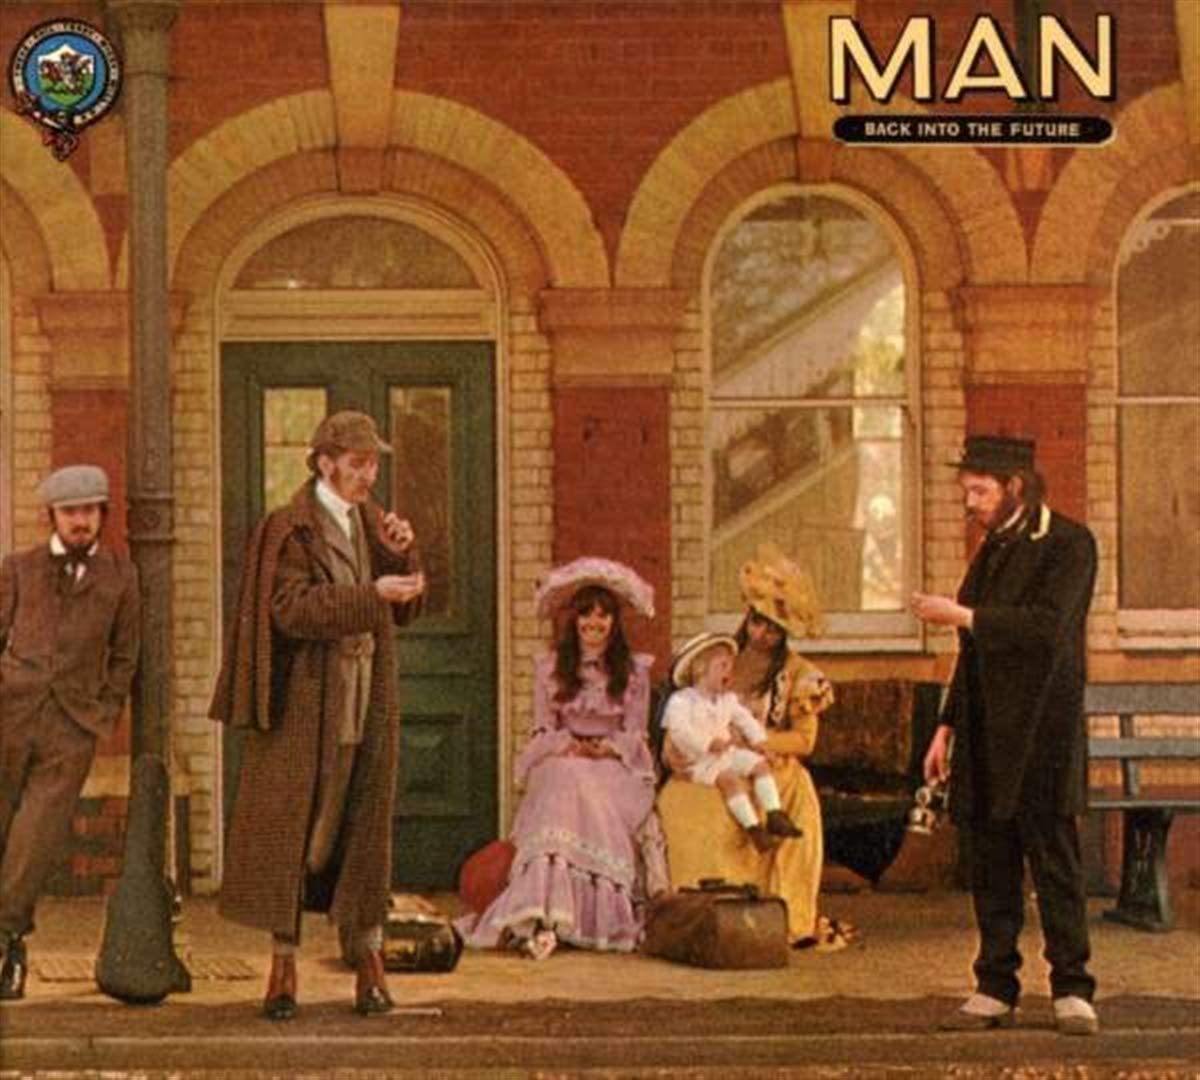 Man - Back Into The Future - 3CD